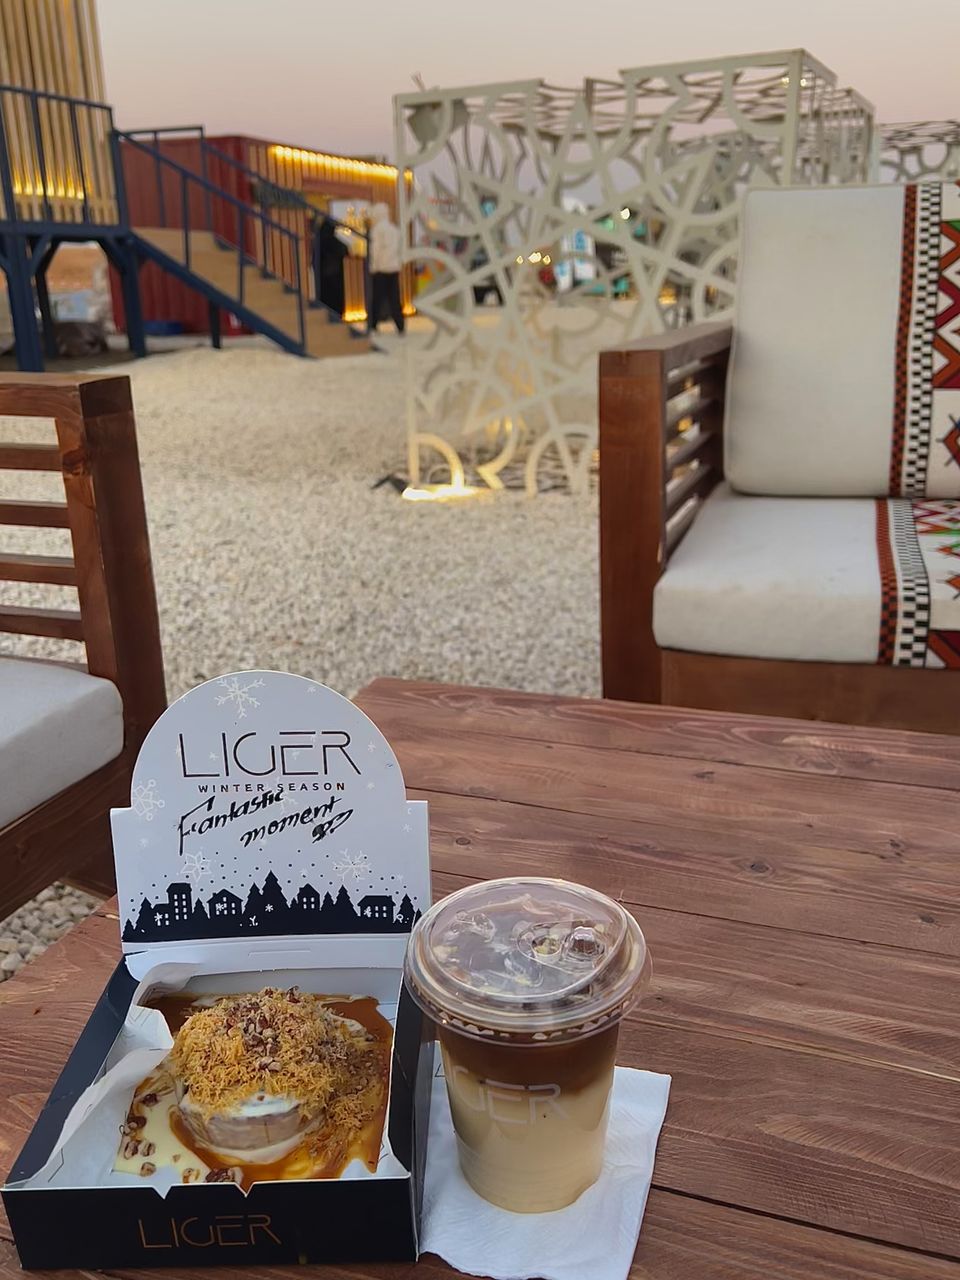 Truck Cafe Table Spanish Latte Riyadh Exit Liger Coffee Cinnamon Food And Drink